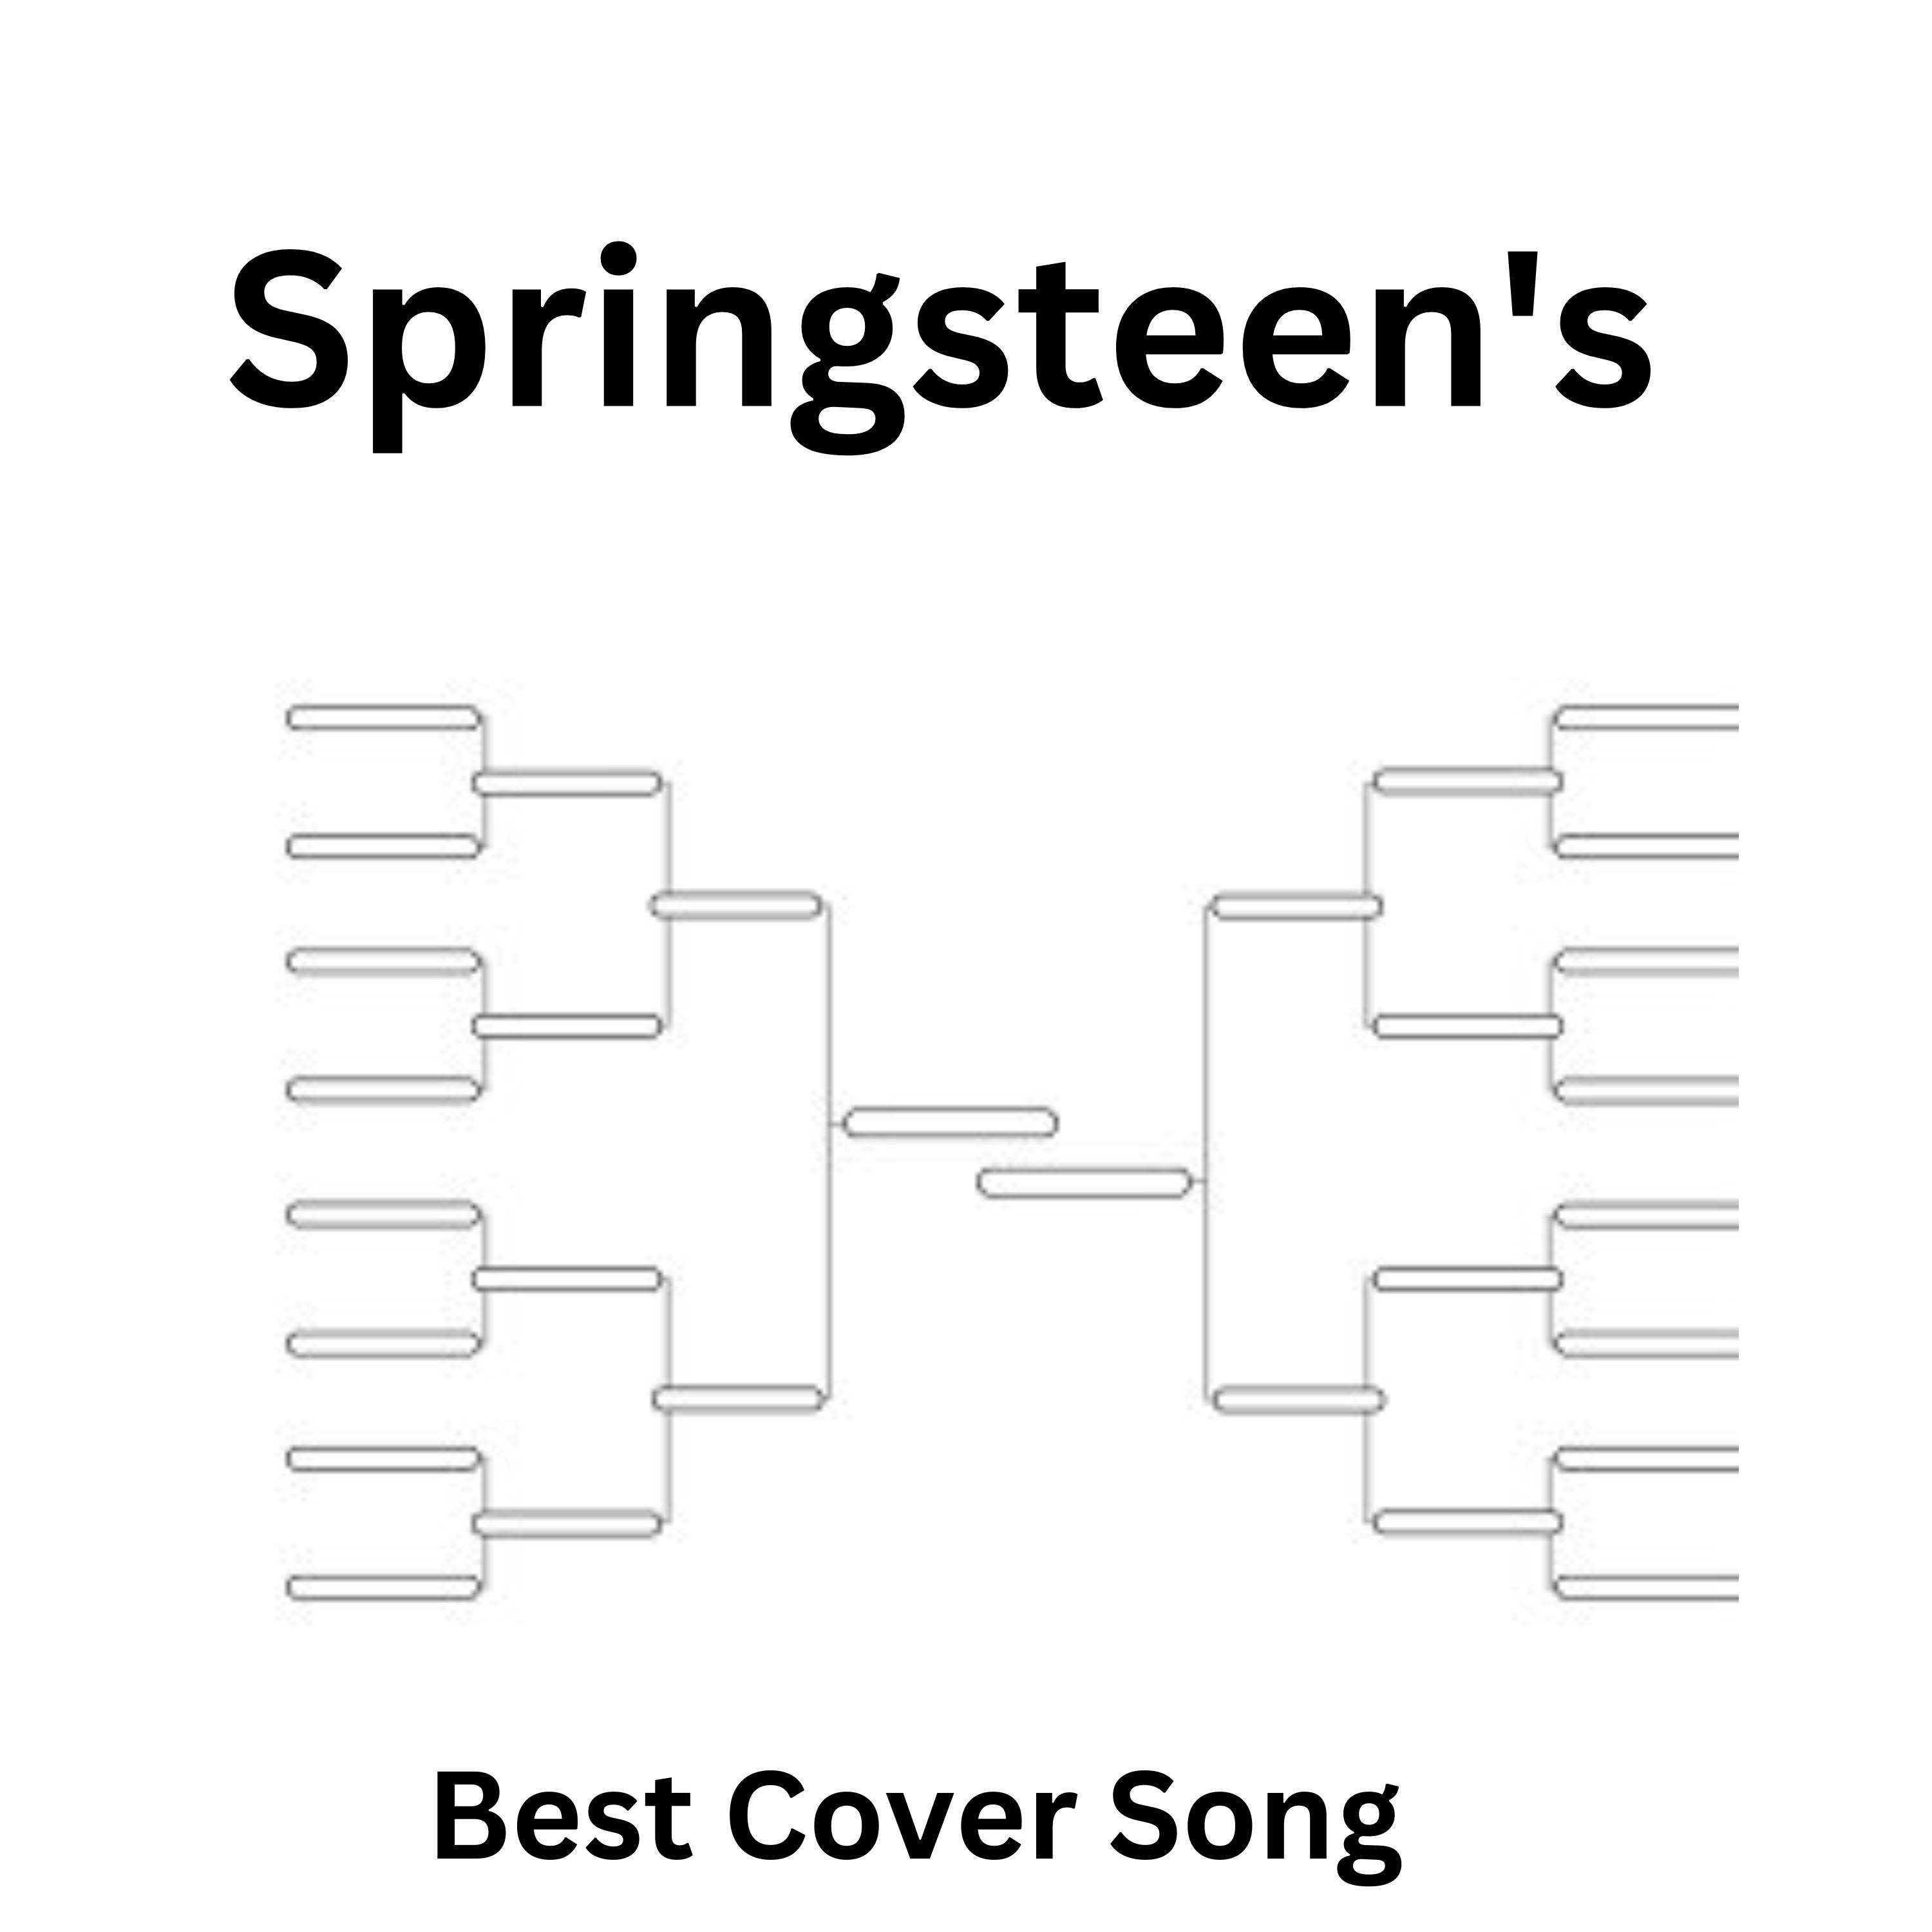 Bruce Springsteen's Best Cover Song Part 1